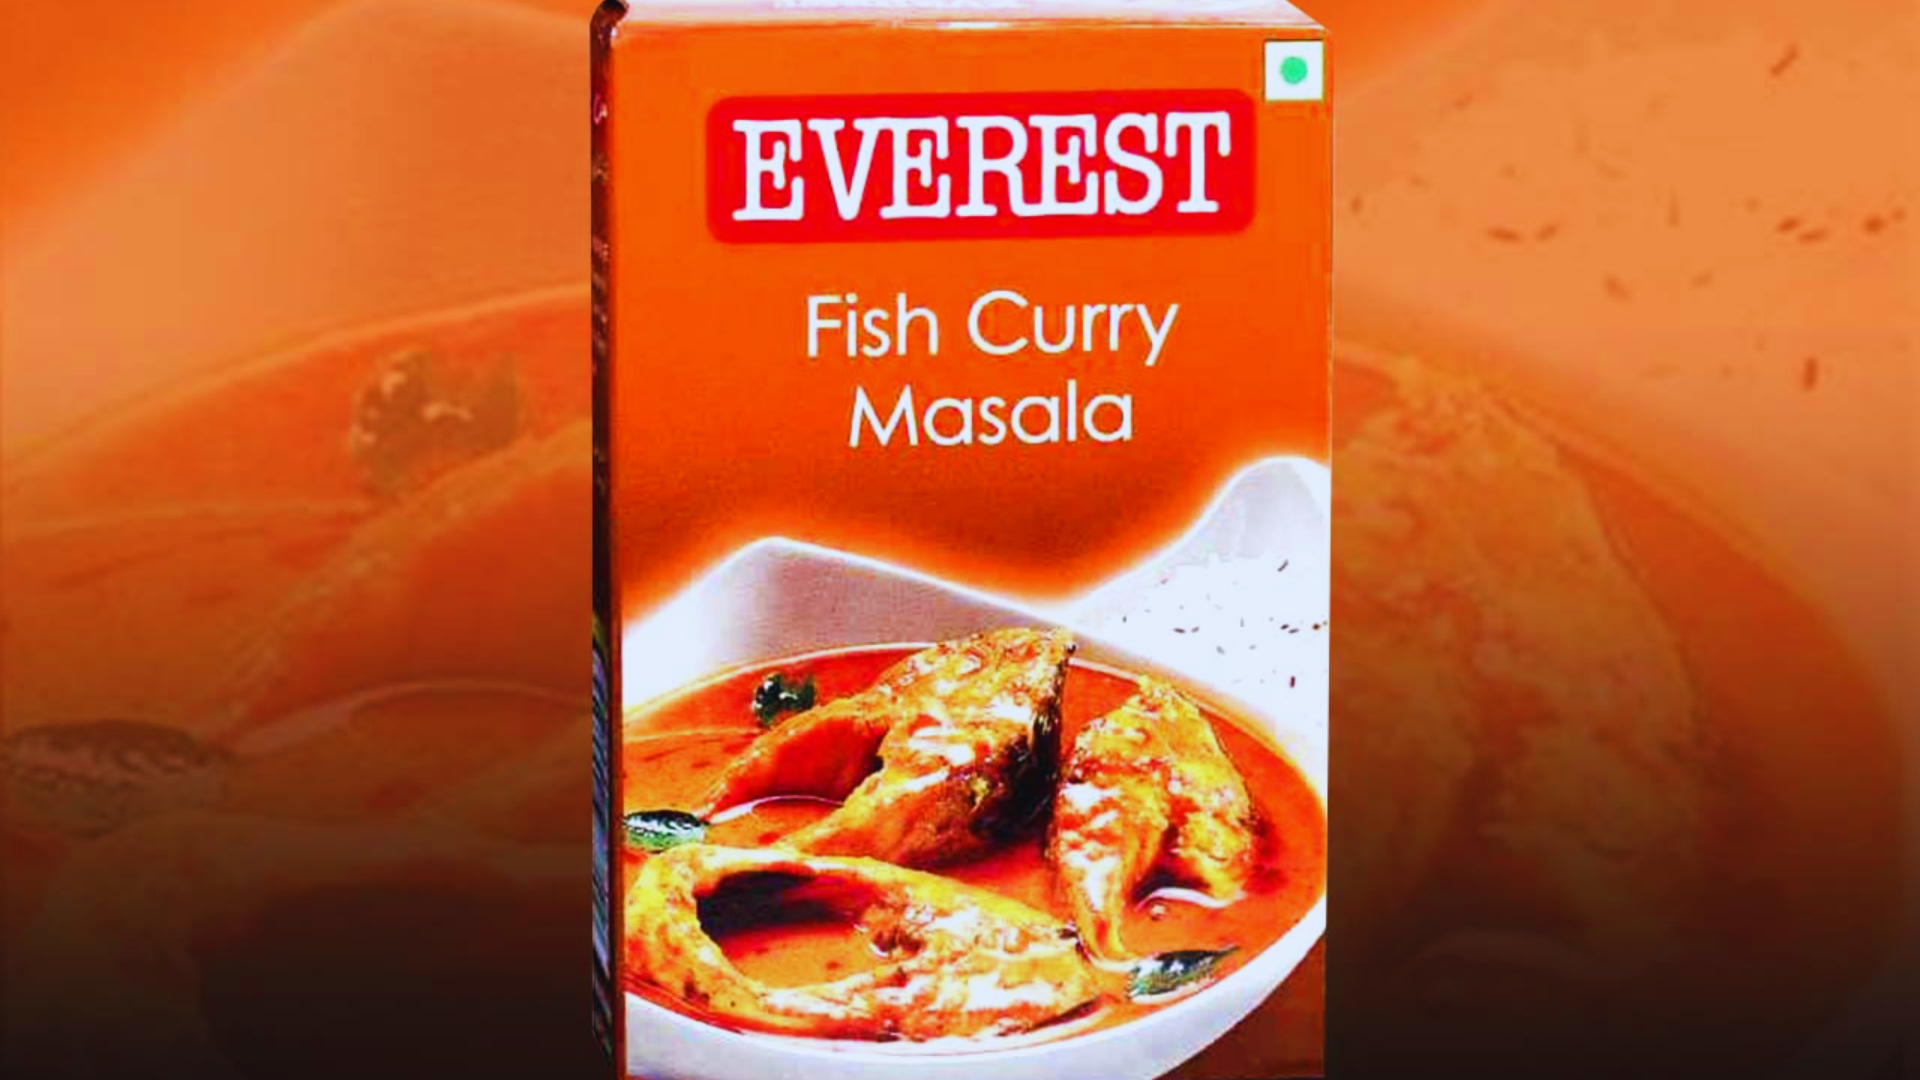 Everest Spice Brand Clarifies: “Not Banned, Only 1 Product Recalled In Singapore” Amidst Controversy